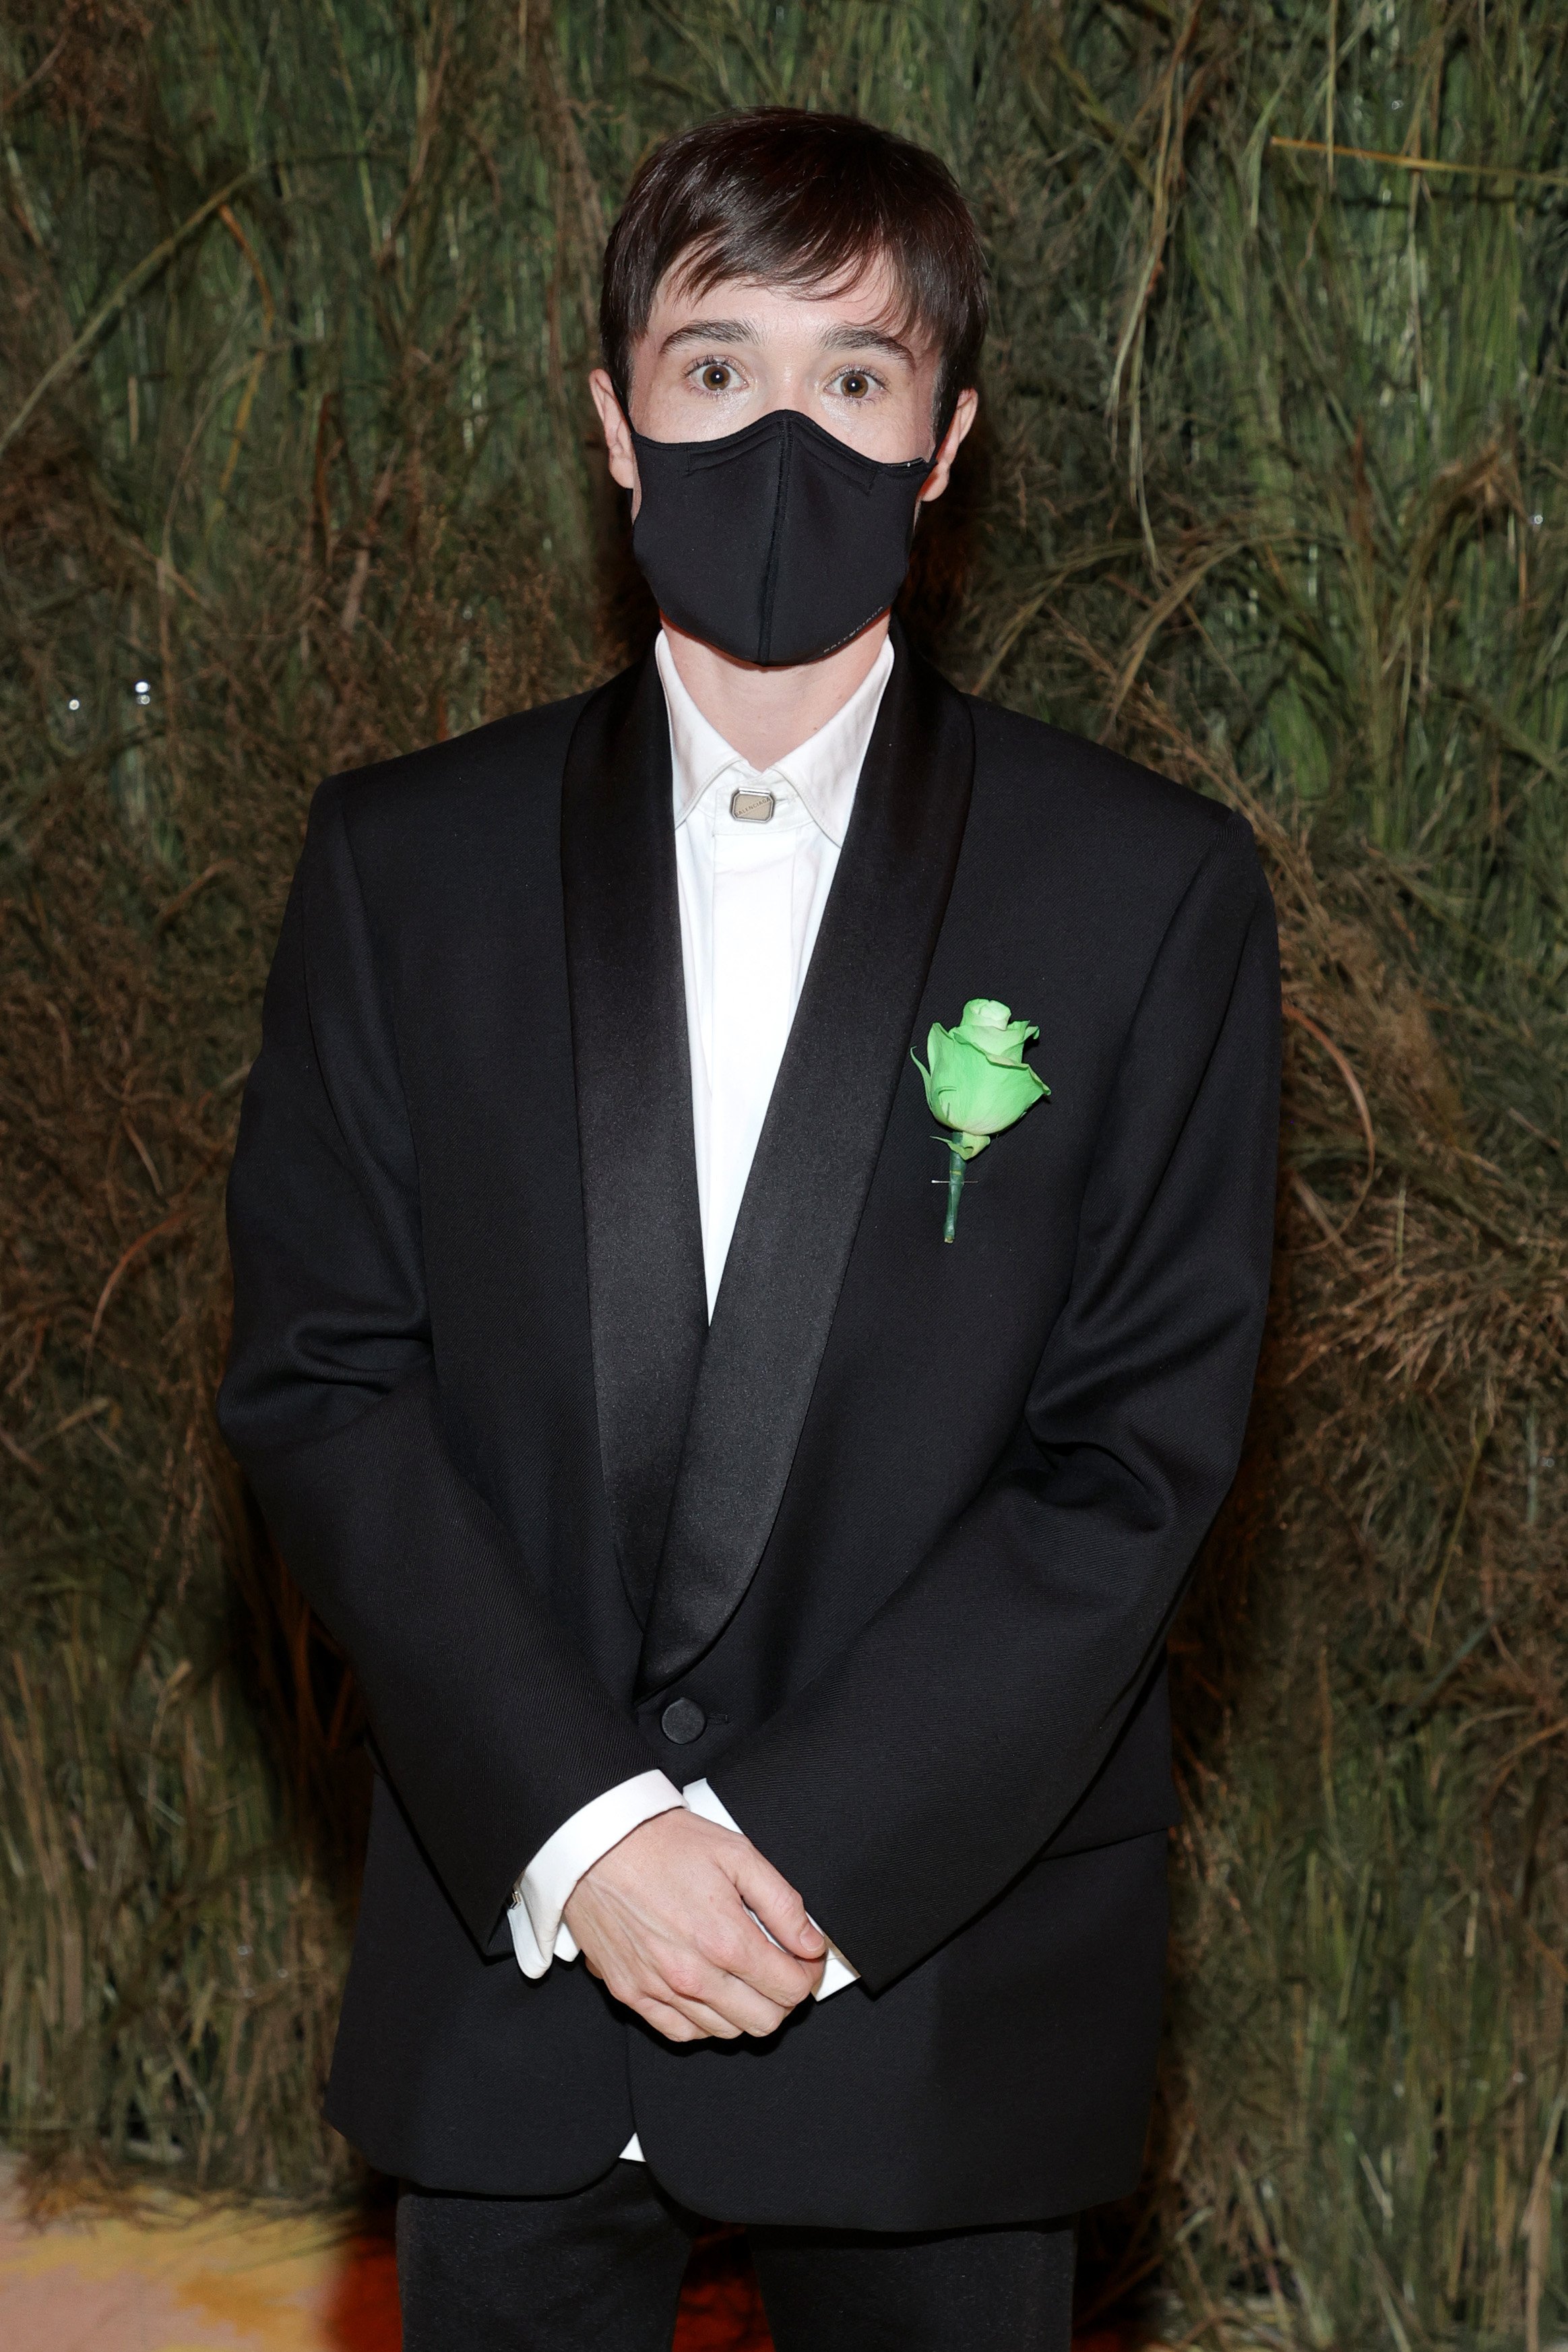 Elliot Page attends the The 2021 Met Gala Celebrating In America: A Lexicon Of Fashion on September 13, 2021 in New York City. | Source: Getty Images